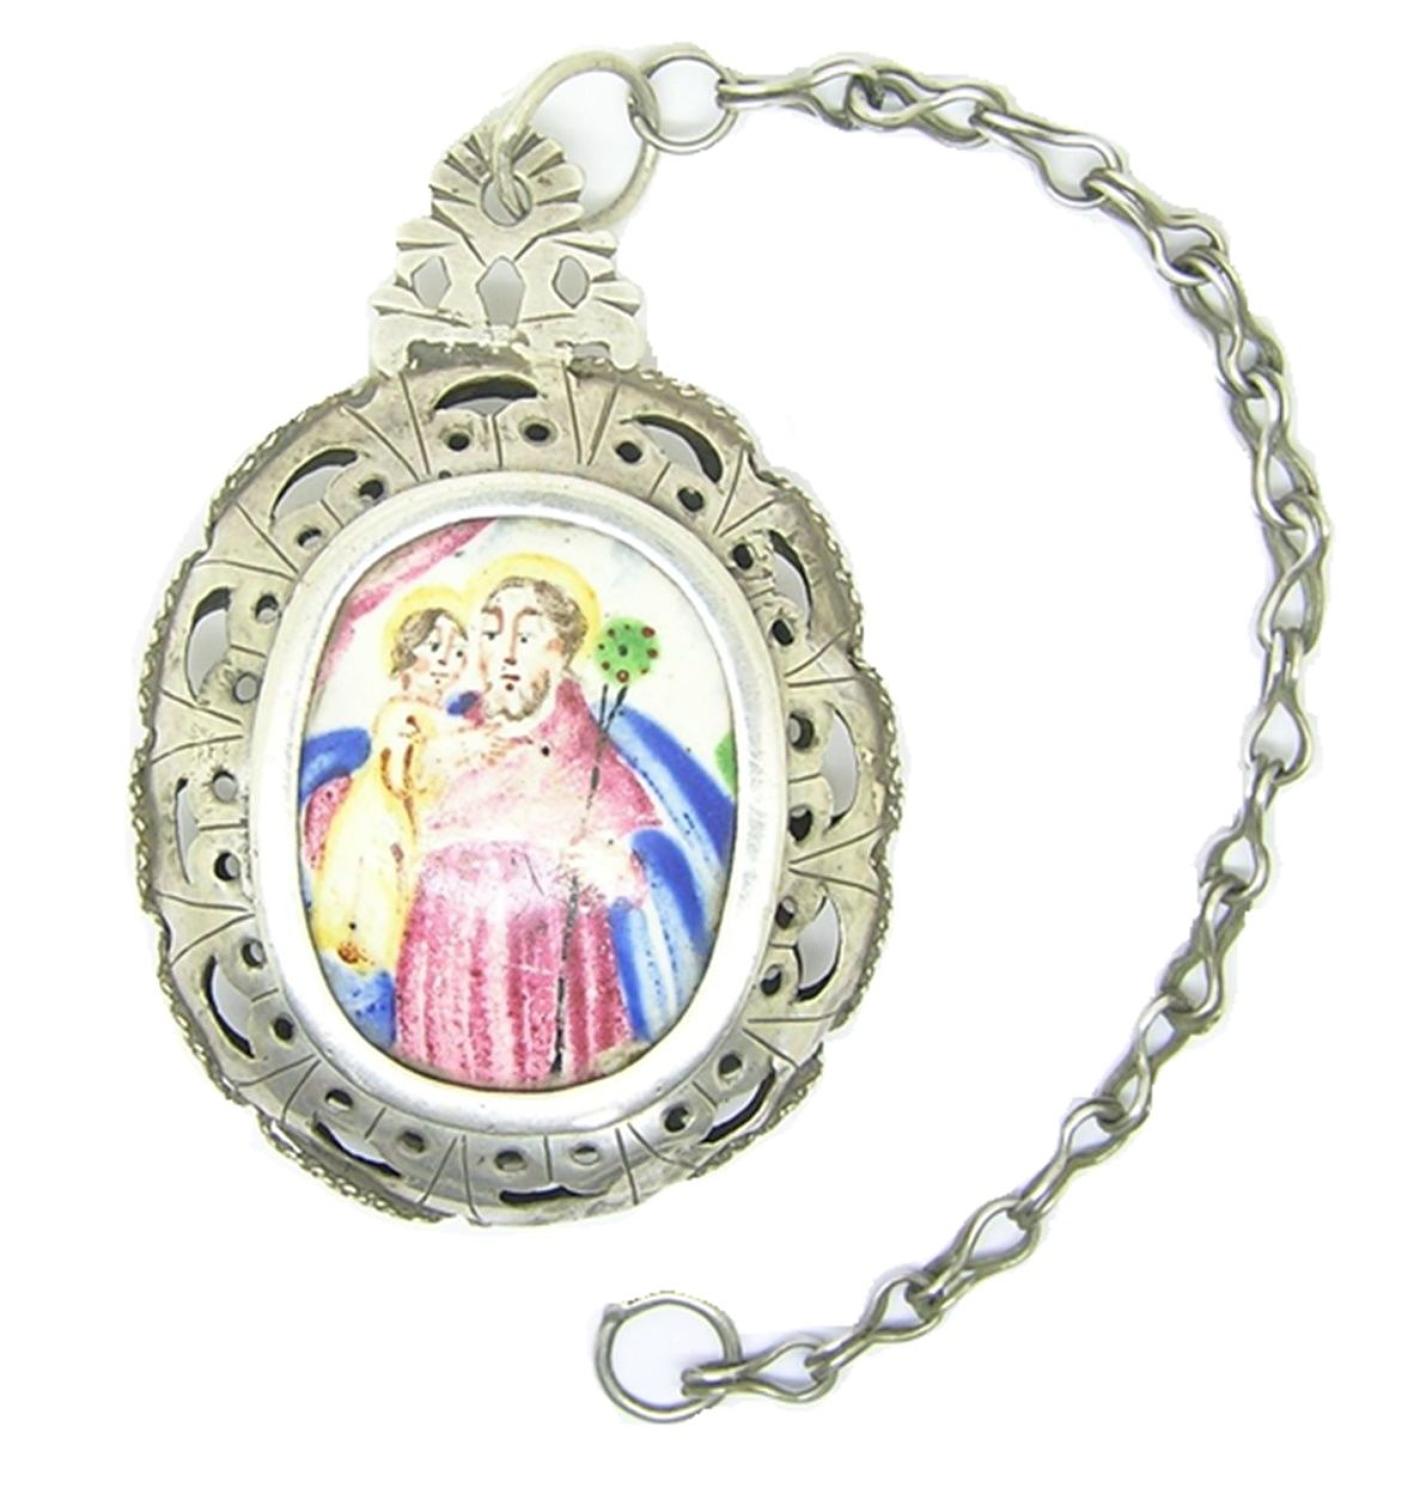 Baroque Silver Reliquary Pendant Chain of St. Christopher